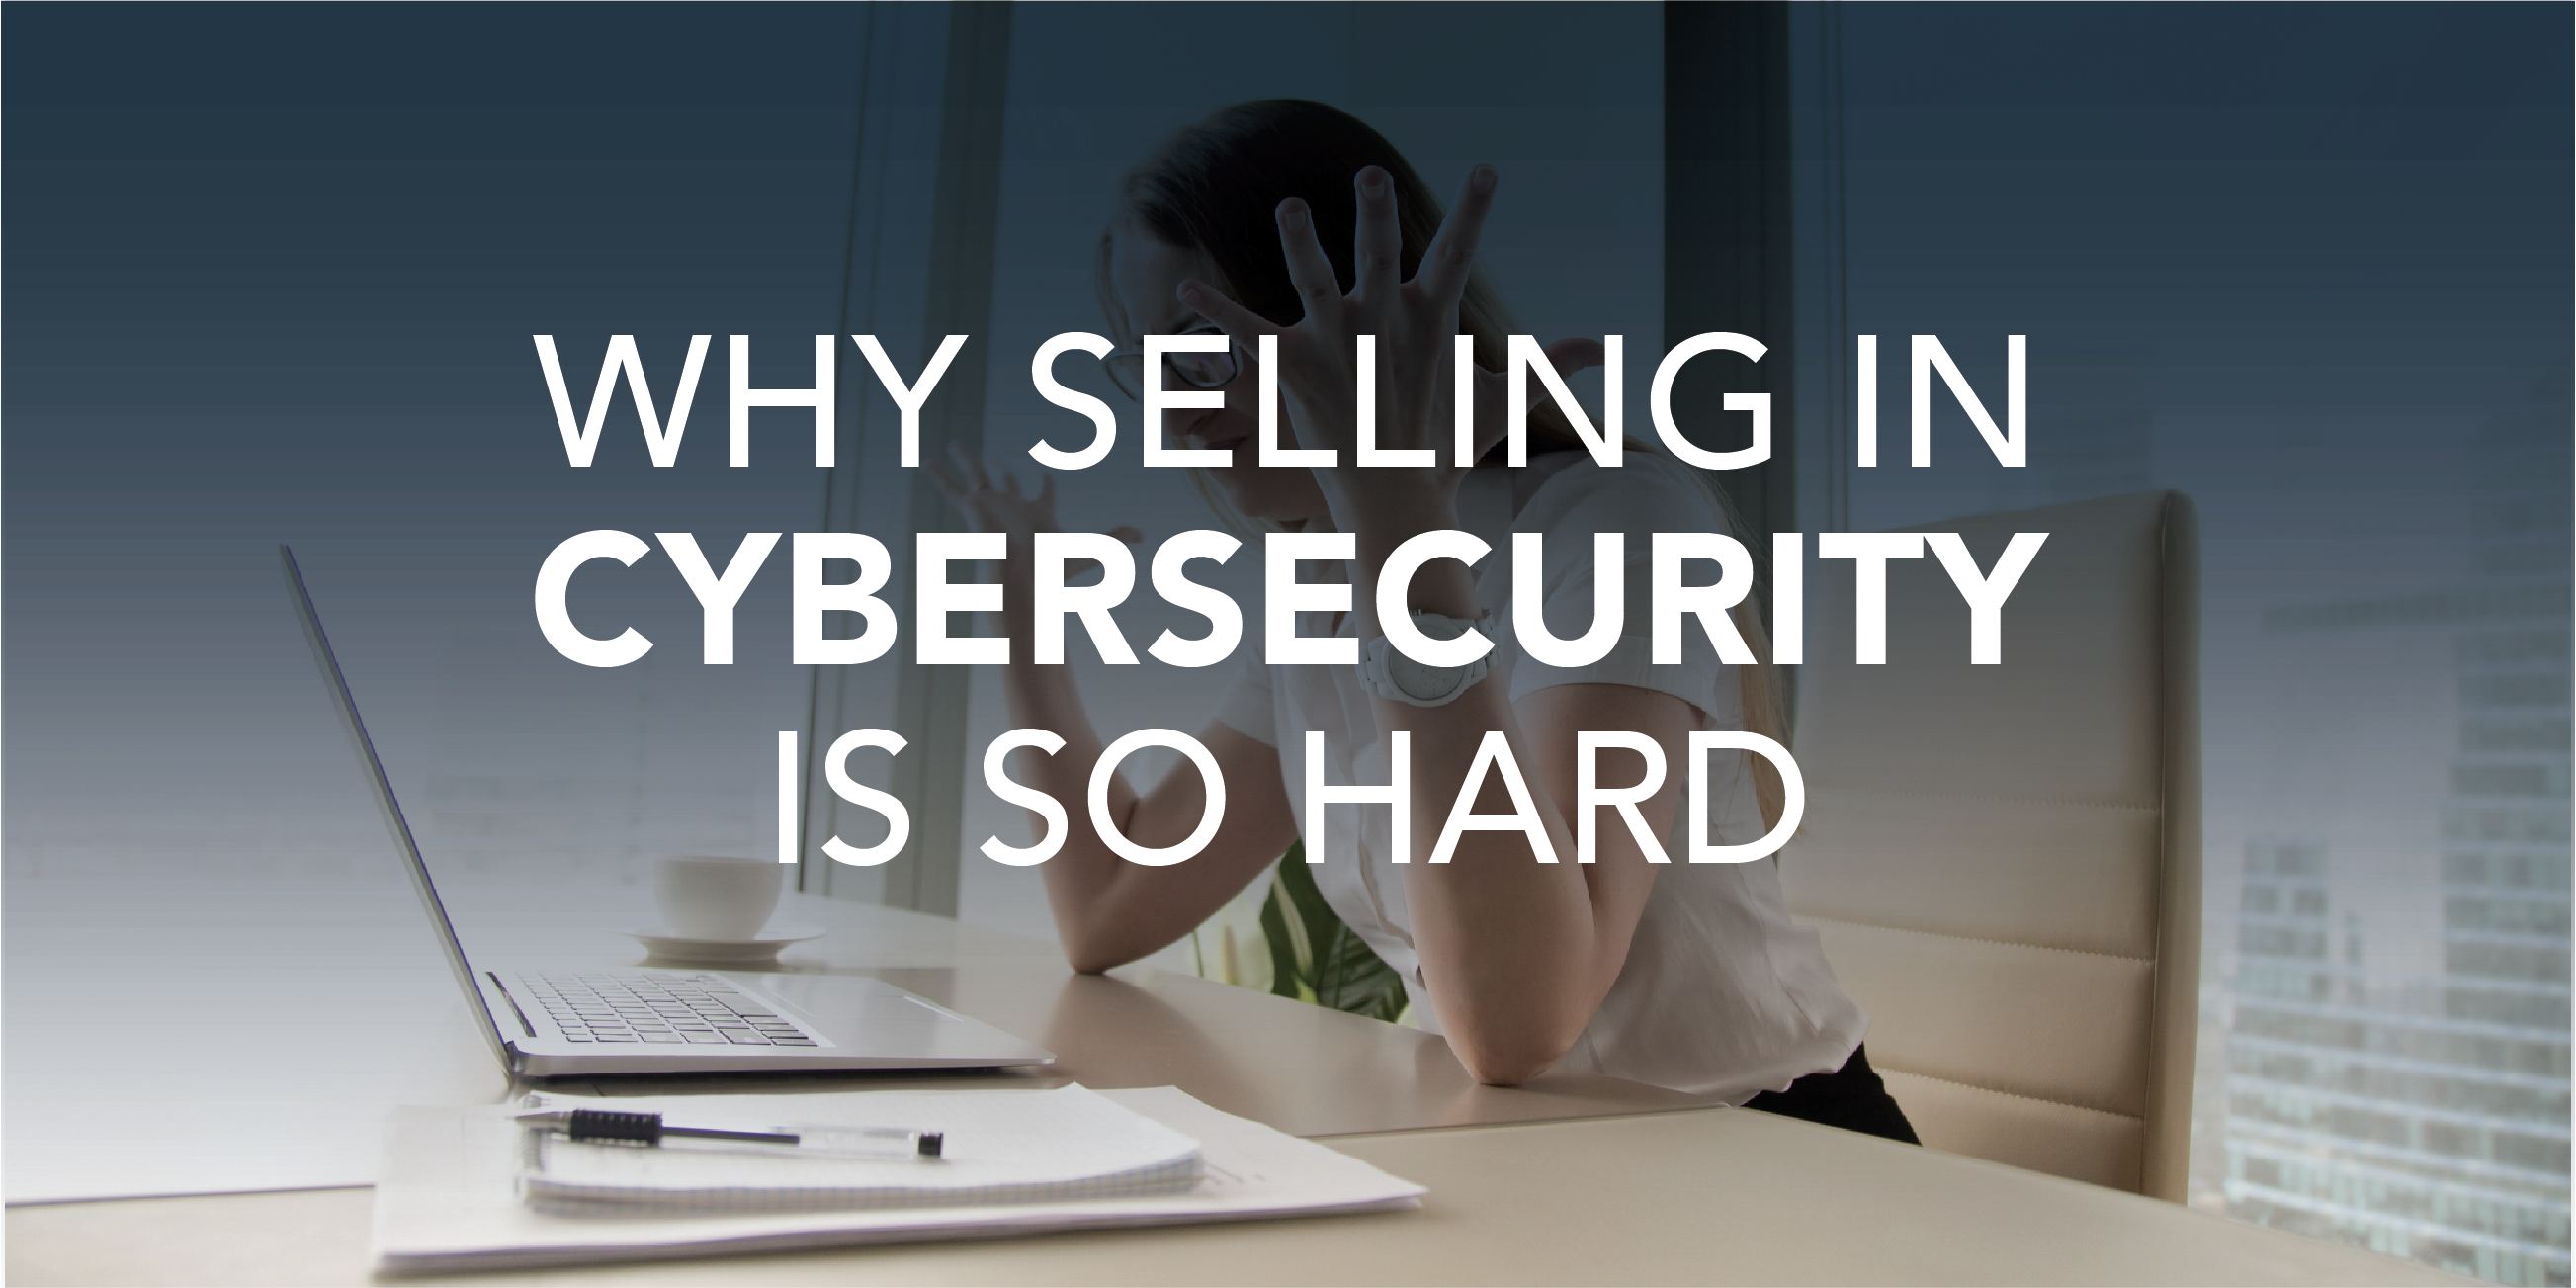 3 Reasons Why Selling in Cybersecurity Is So Hard